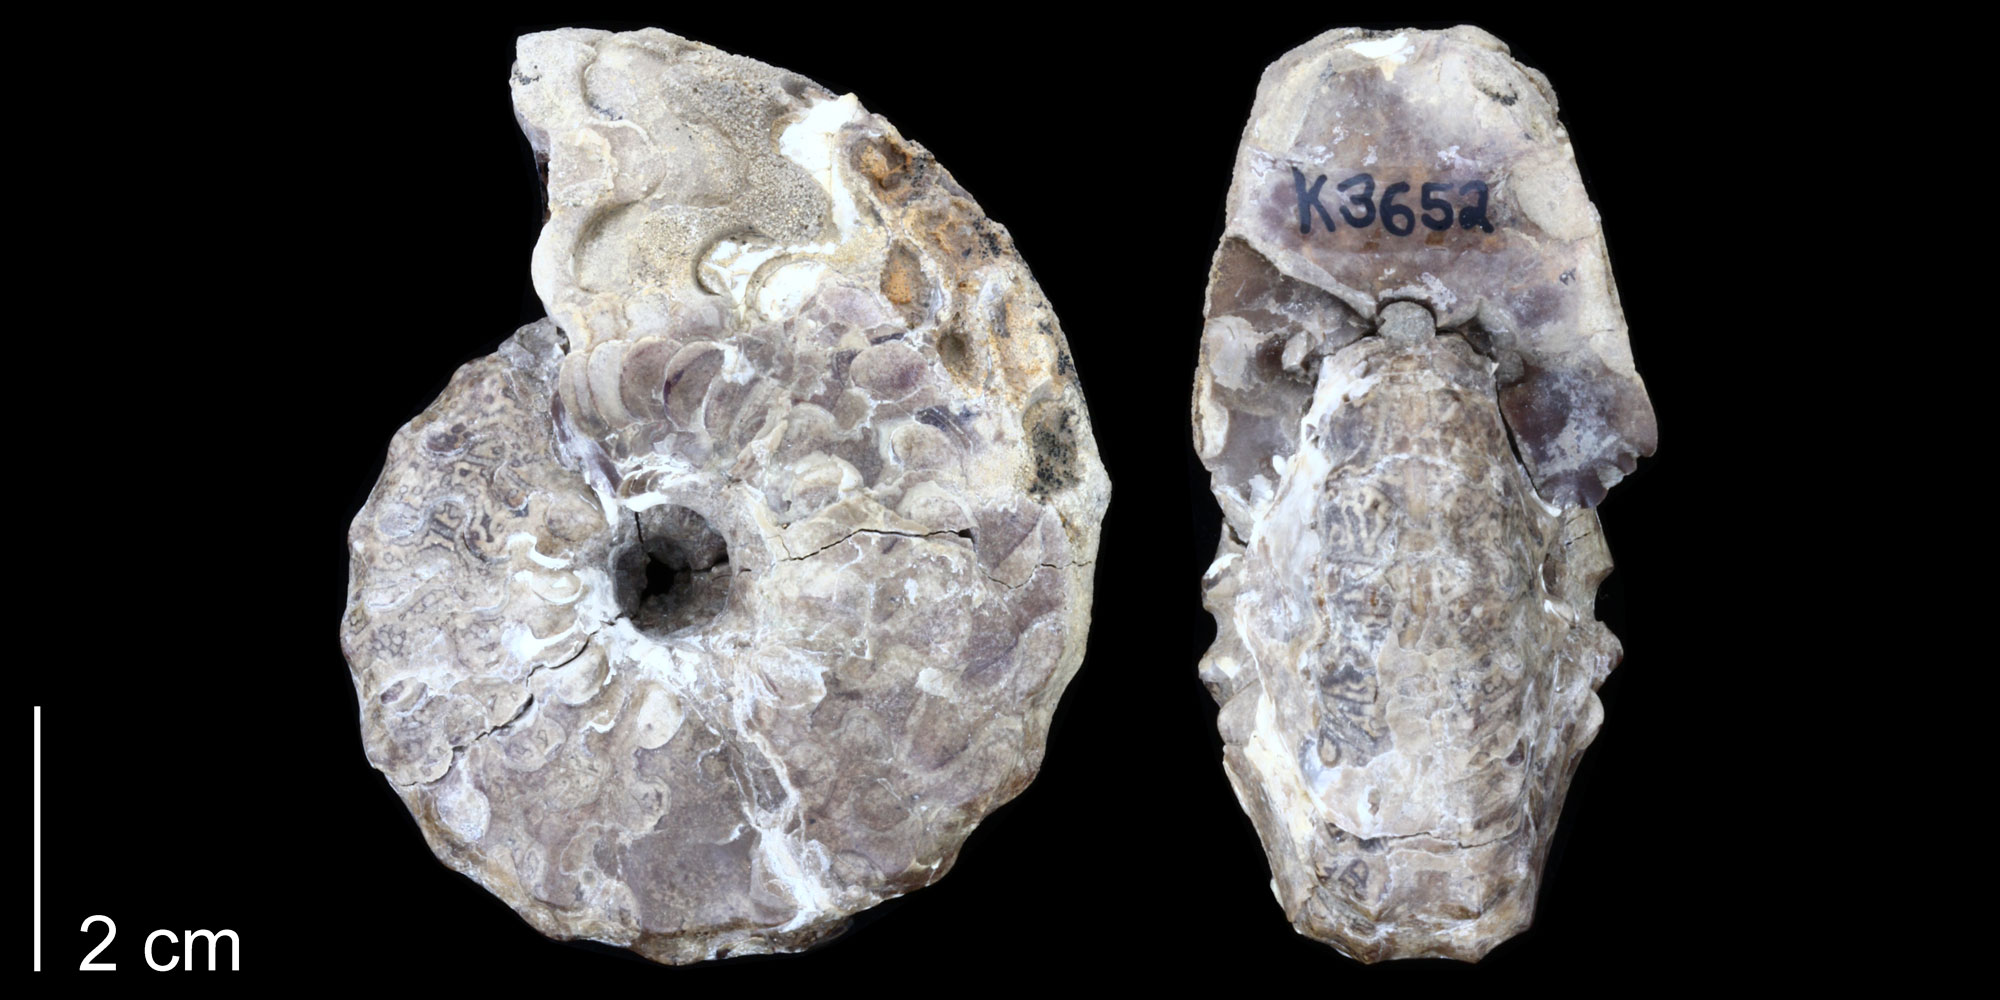 Photographs showing two views of an ammonite shell from the Cretaceous of New Mexico. The shell is spiraling in one plane. It is showing in side (left) and end (right) views. The sinuous suture pattern can be seen. The shell is light gray.